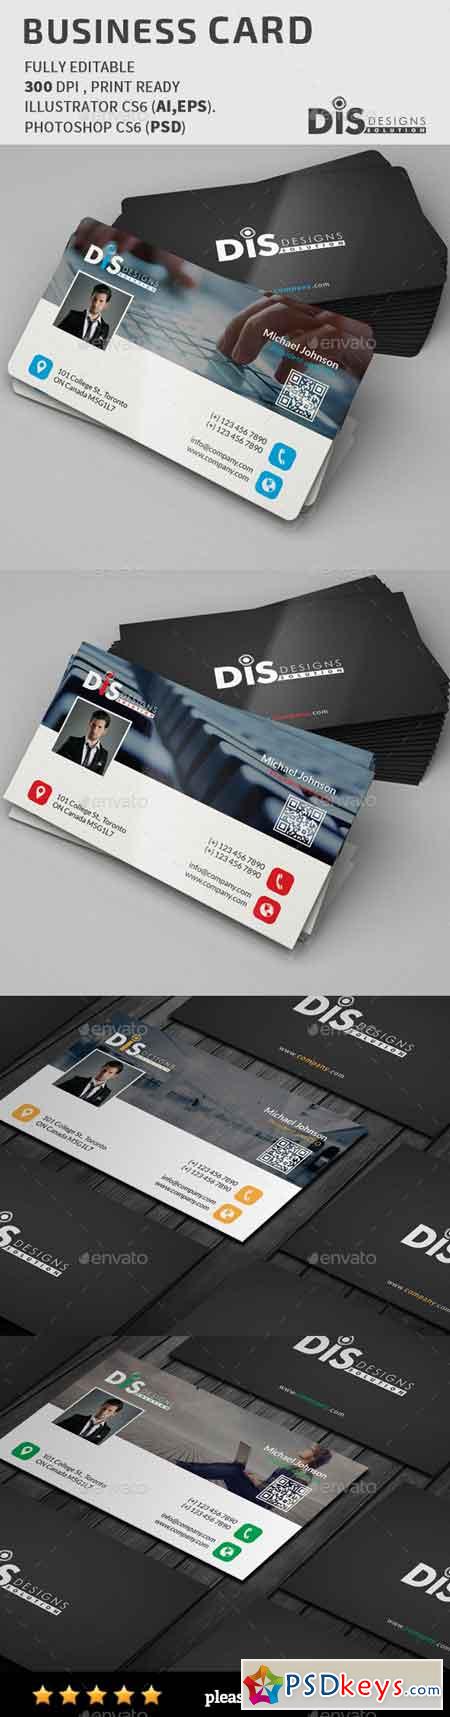 Business Card 13852424